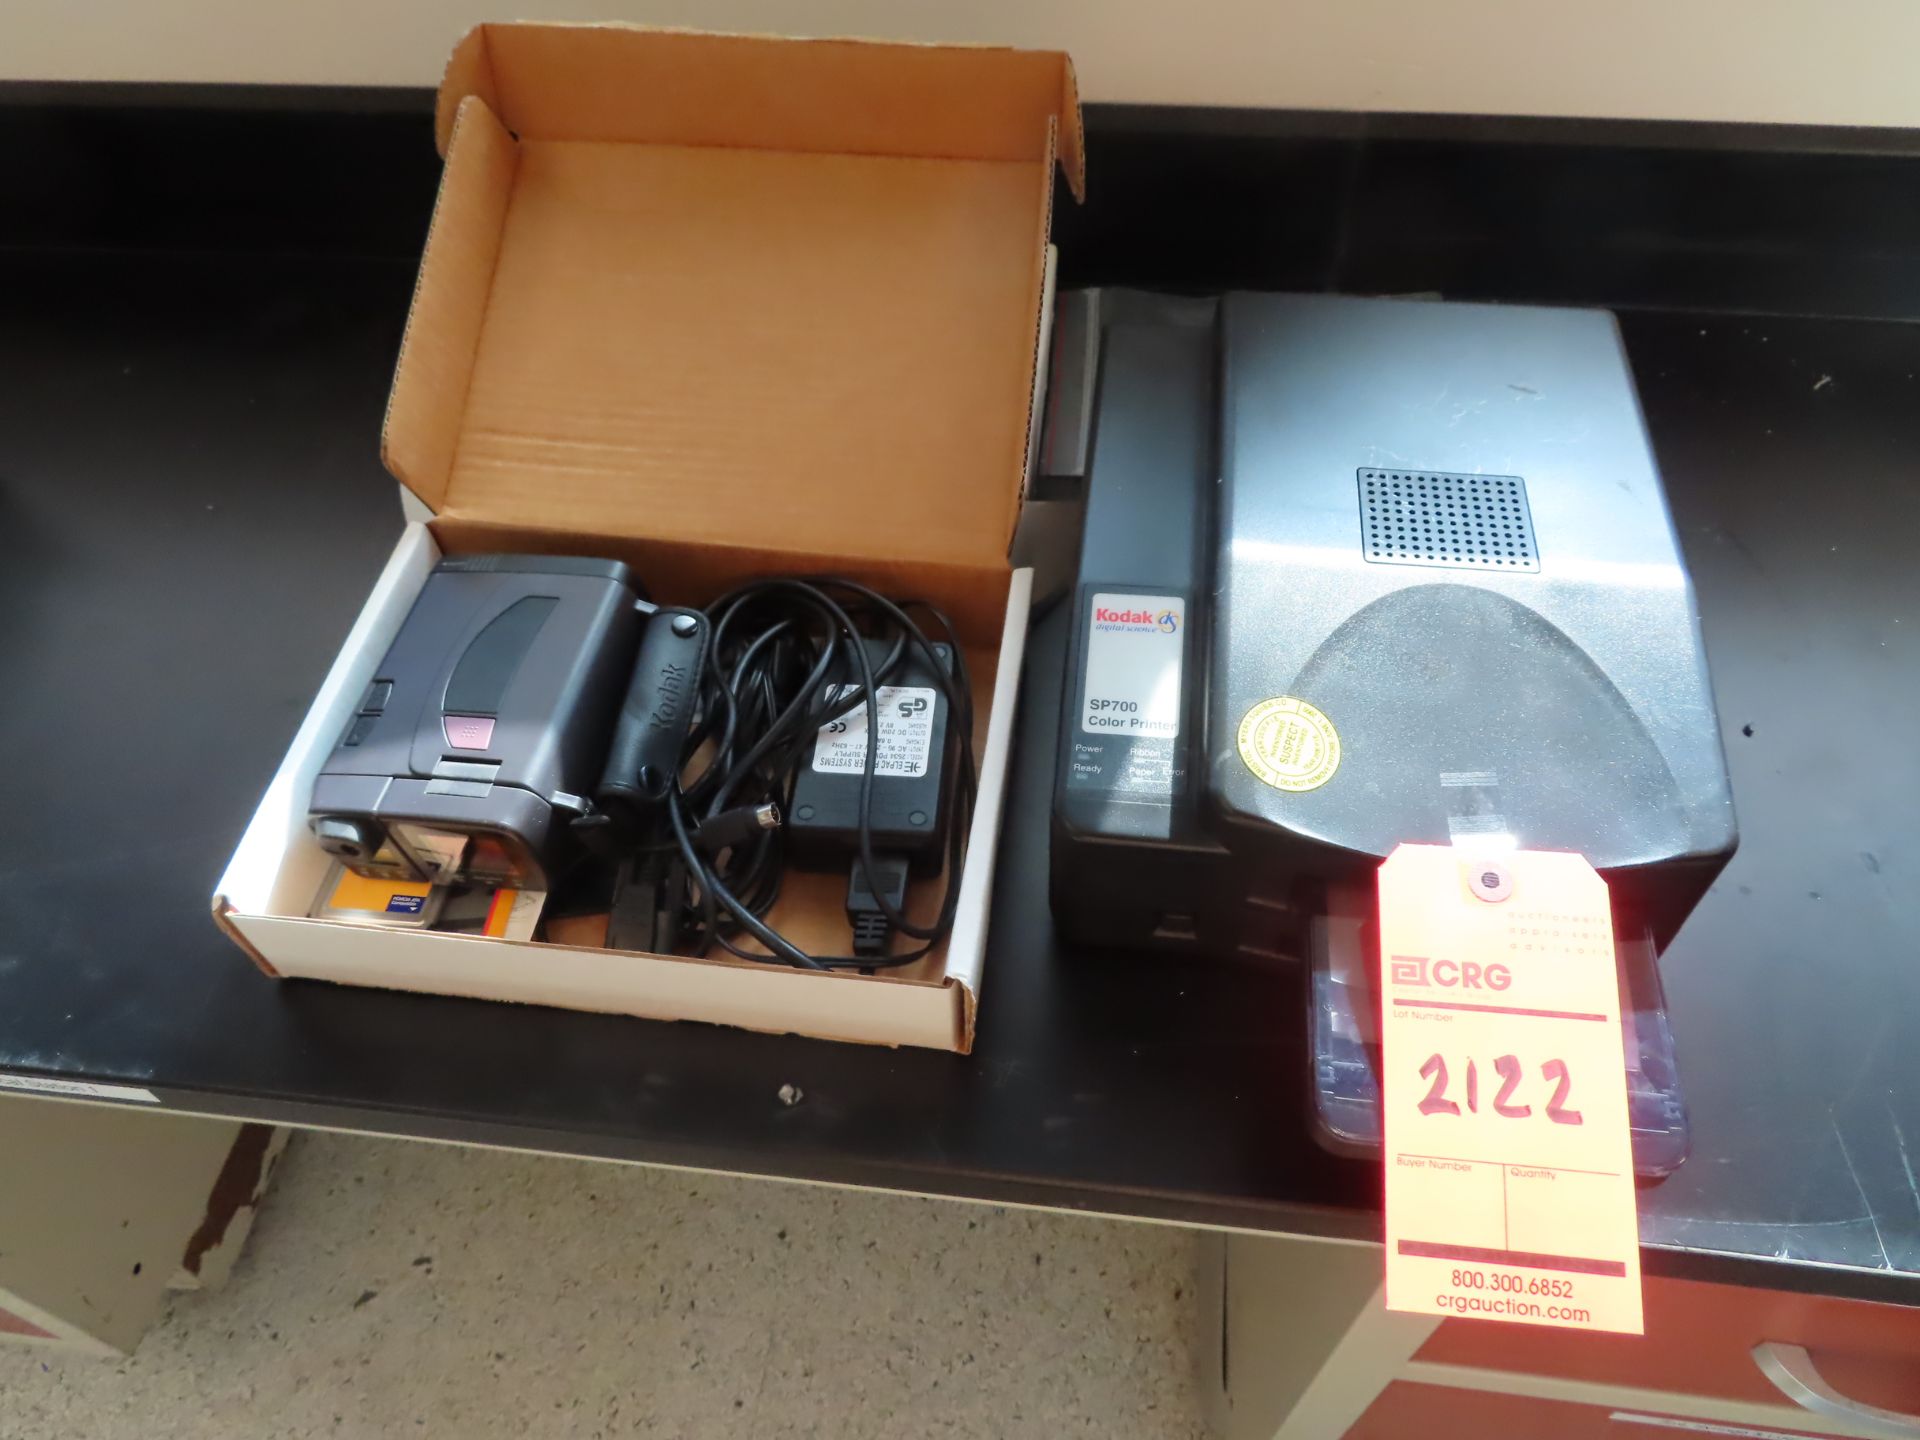 Lot including: Kodak DC120 digital camera and SP700 color printer, located in D wing, 3rd floor,